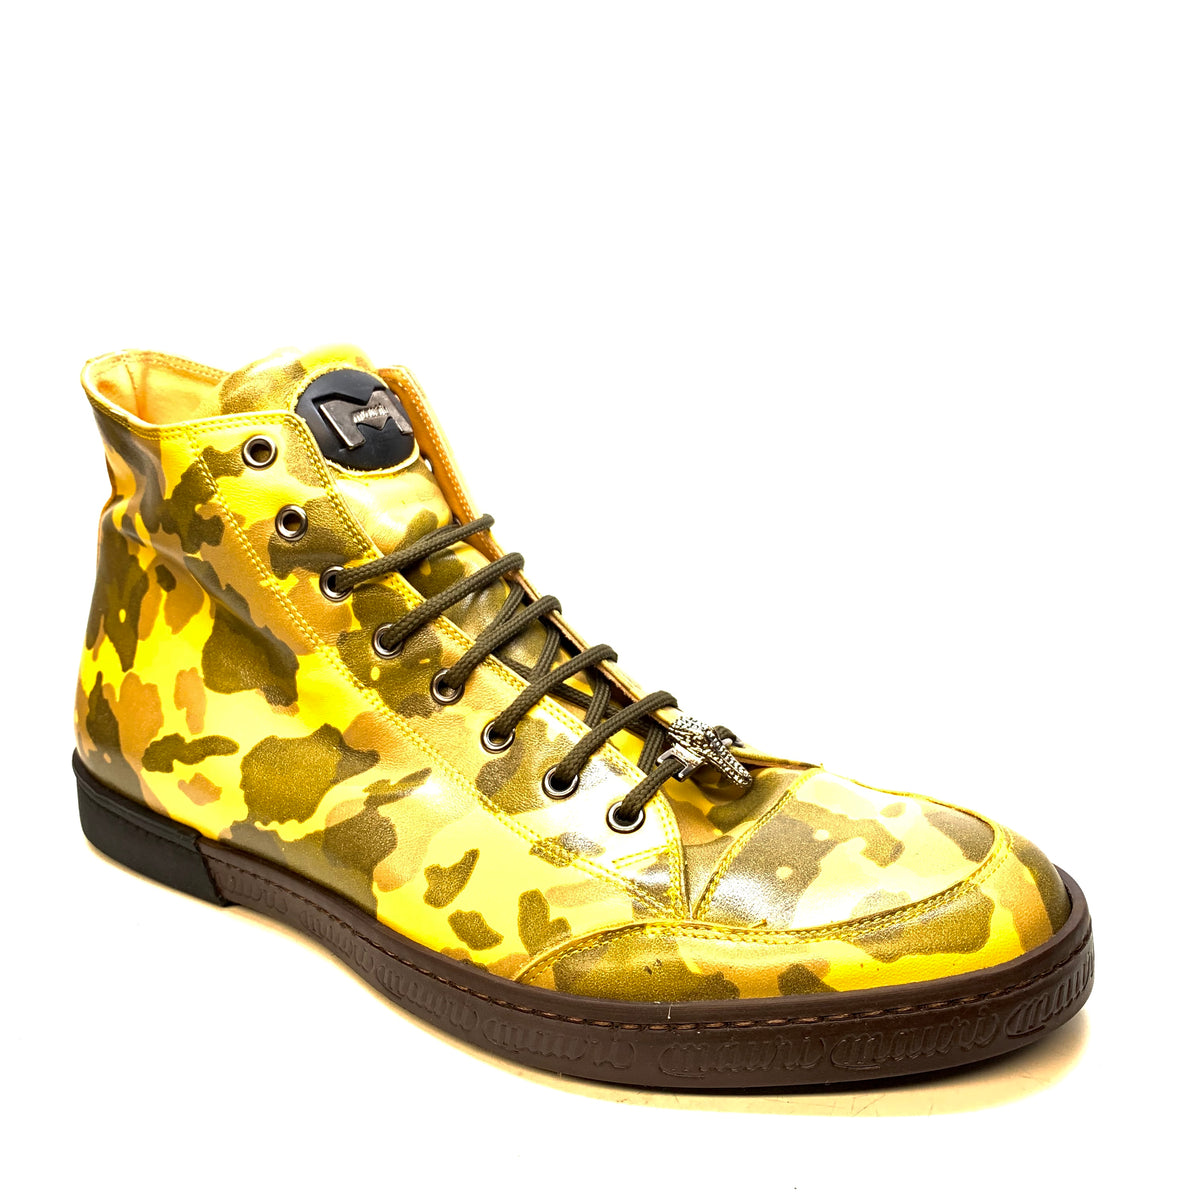 Mauri ‘8888’ Camouflage Leather High-Top Sneakers - Dudes Boutique